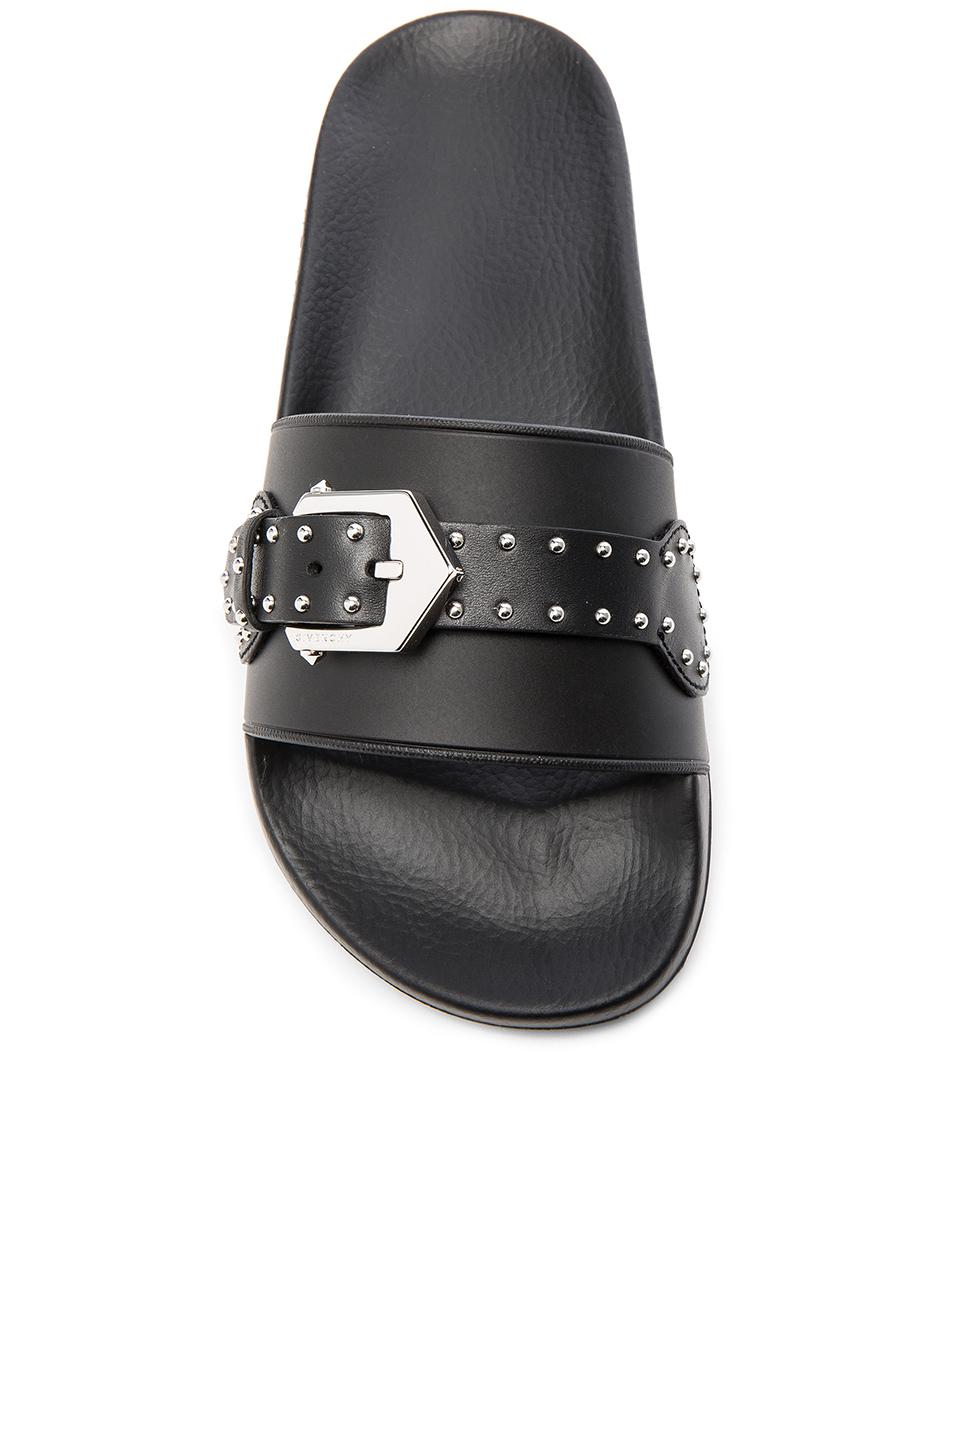 Givenchy Buckle Rubber Slides in Black - Lyst